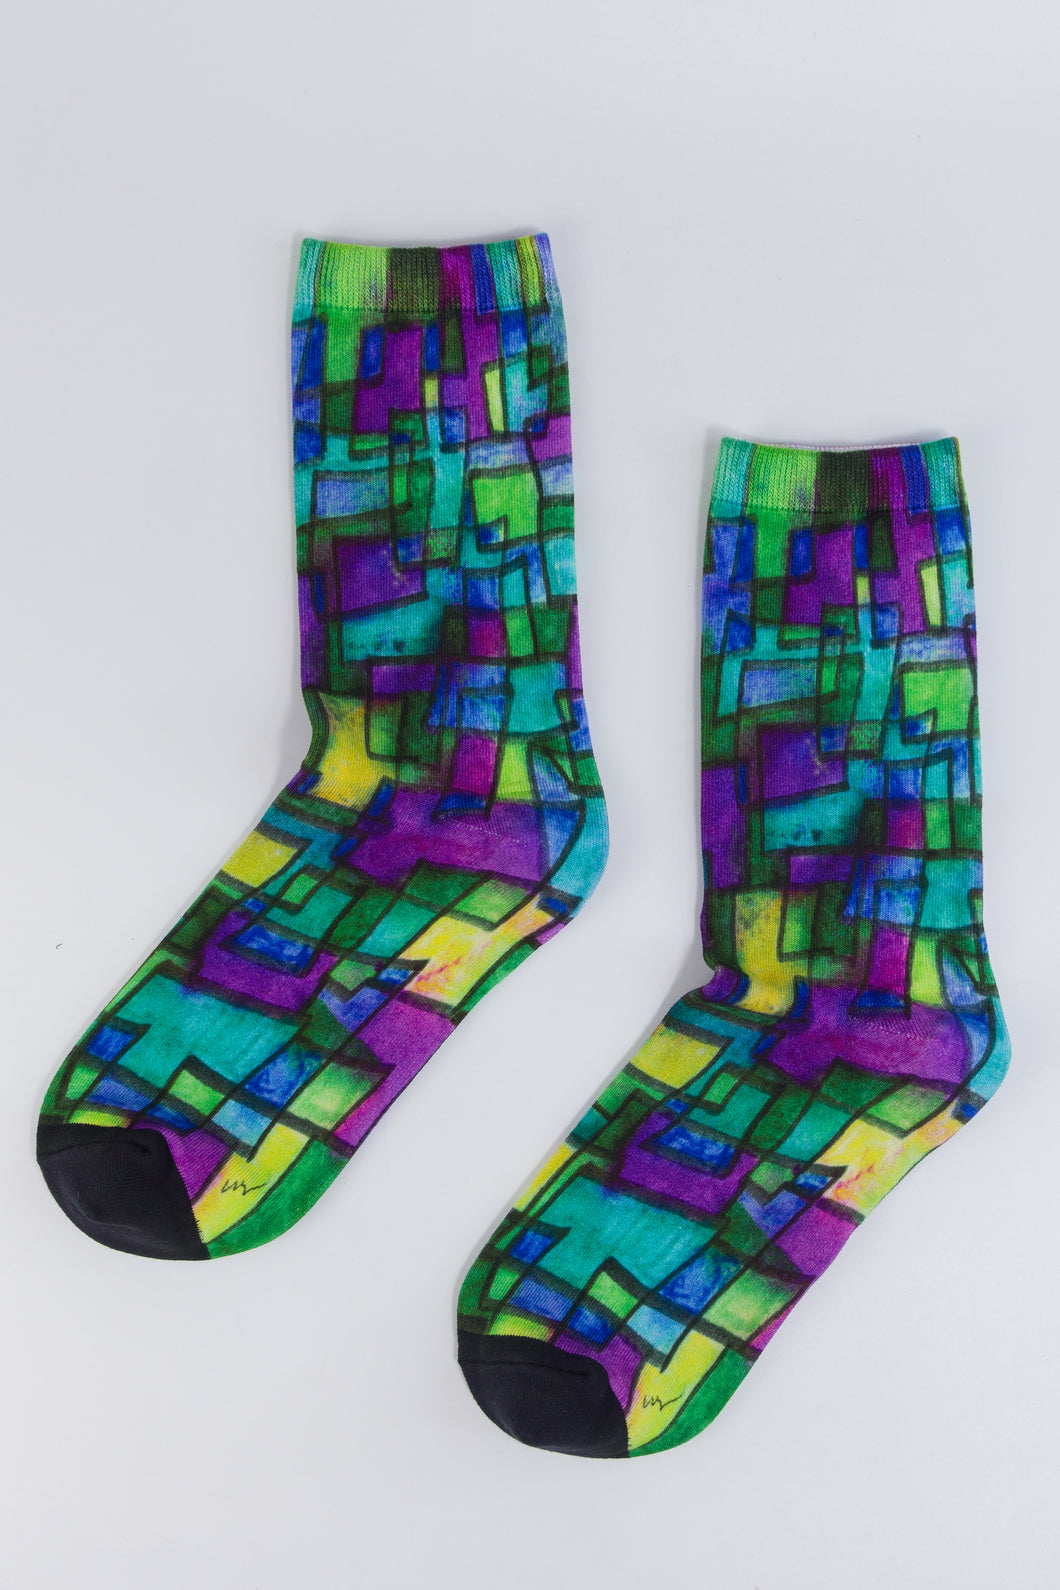 Abstract bamboo sock in purple, blue, yellow, and green geometrical designs. 